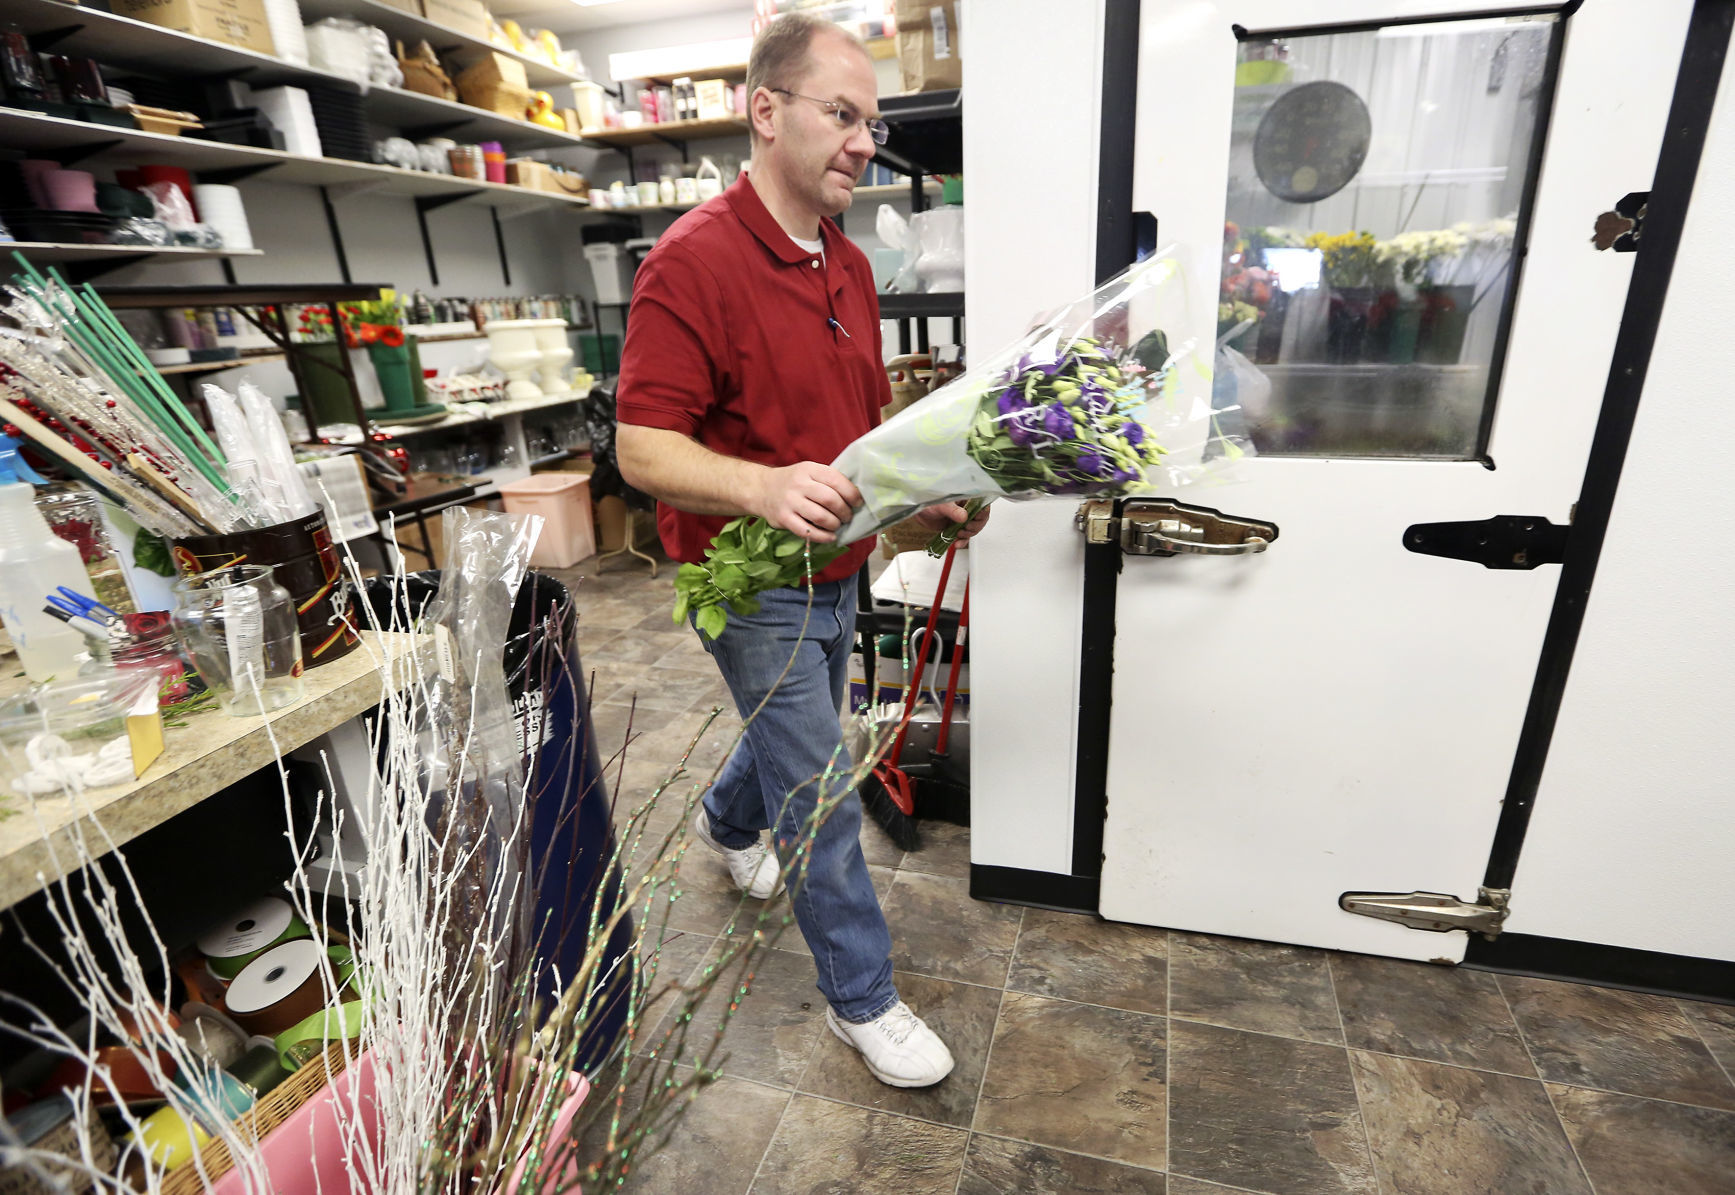 Owner Brian Fitting gathers flowers for arrangements at Butt